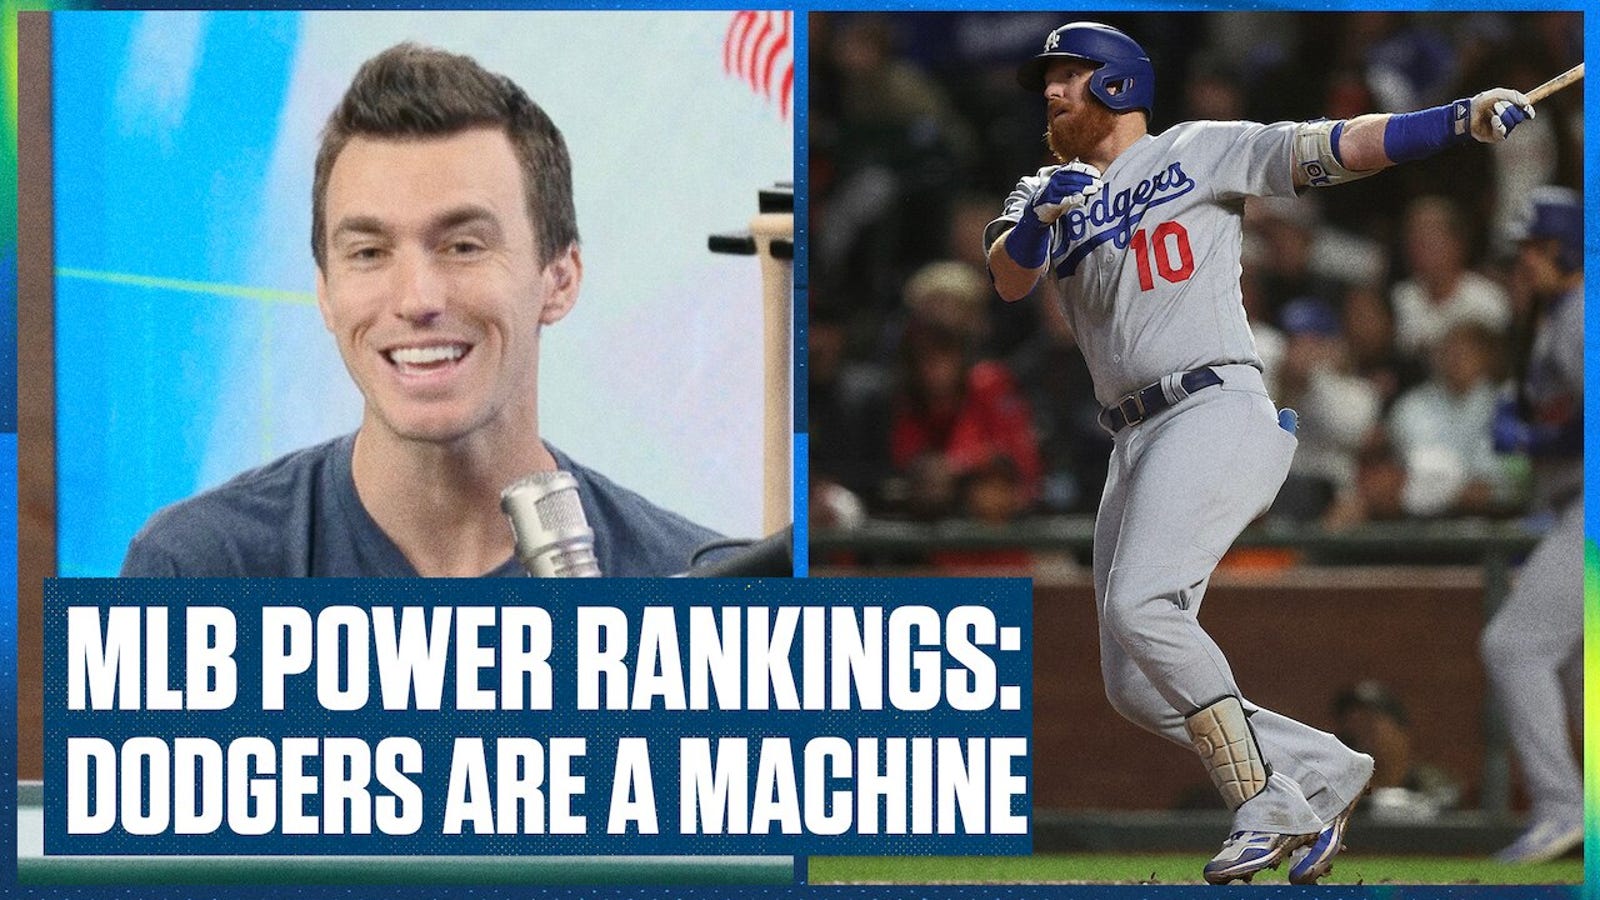 MLB Power Rankings: Astros and Dodgers are still some of the best teams in baseball